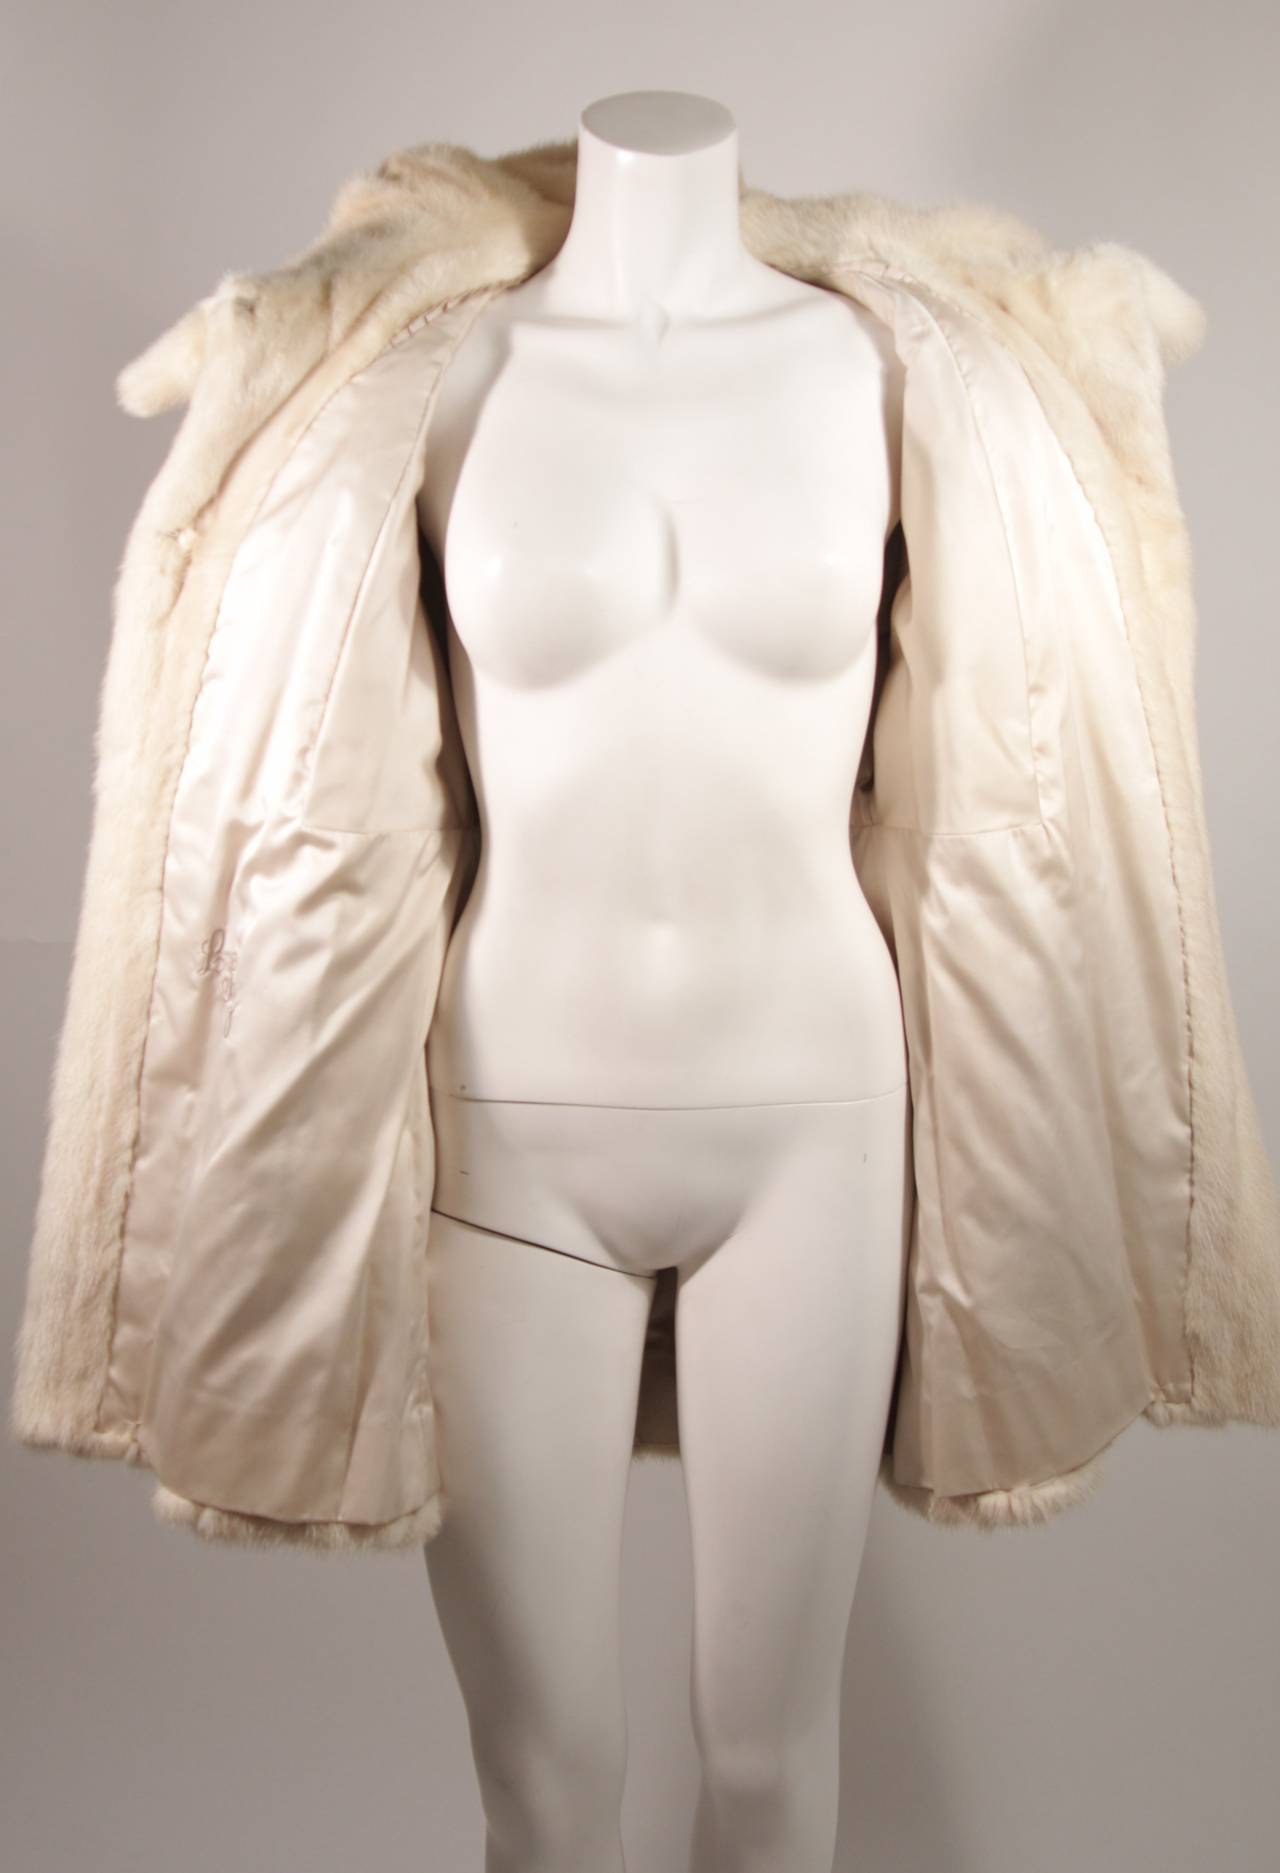 Galanos Ivory Mink Coat with Ruffle Tie Collar and Full Sleeves & Stretch cuff For Sale 4